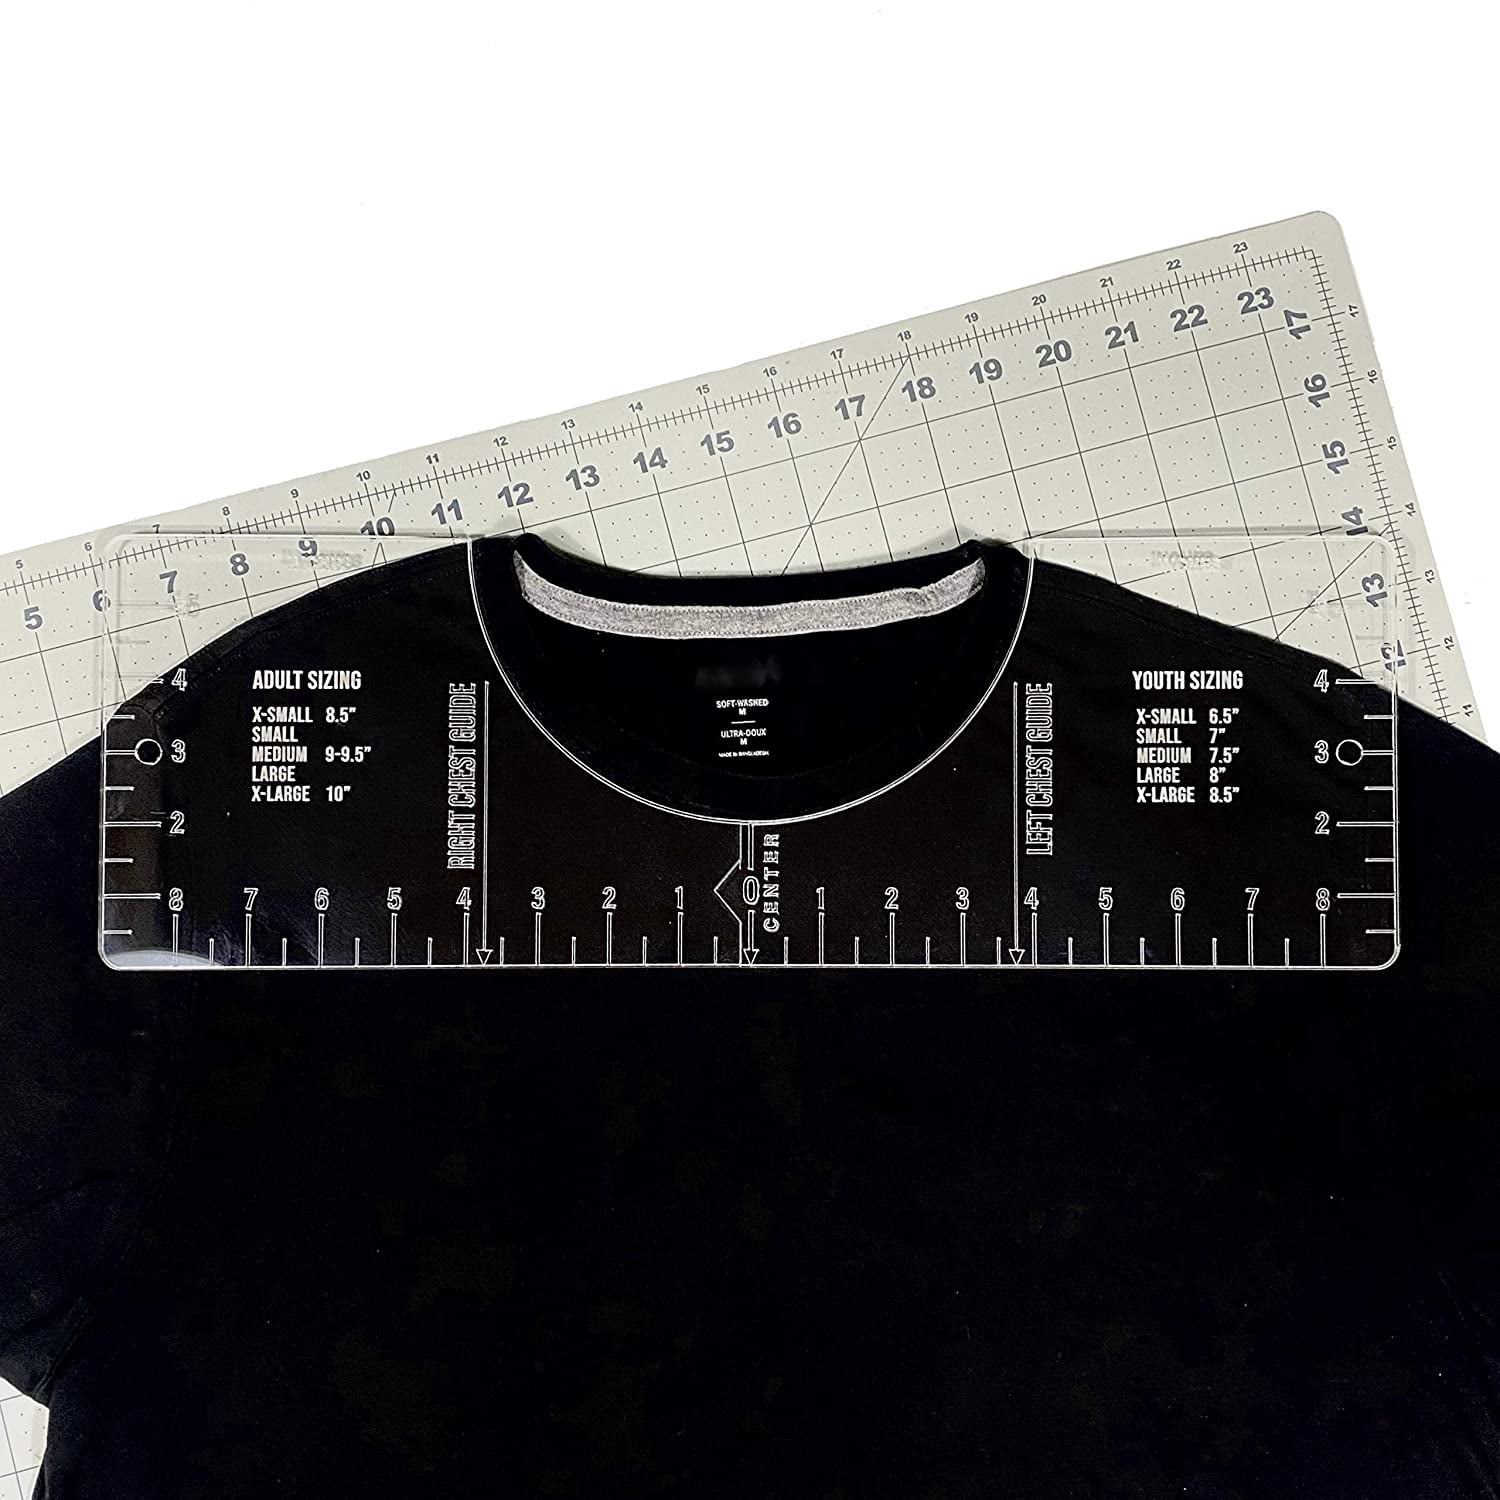 T-Shirt Ruler Guide，Tee Alignment Ruler for Applying Vinyl and Sublimation Designs to Center Designs on Shirts Shirt Ruler Guide Tool Acrylic,Fashion A 